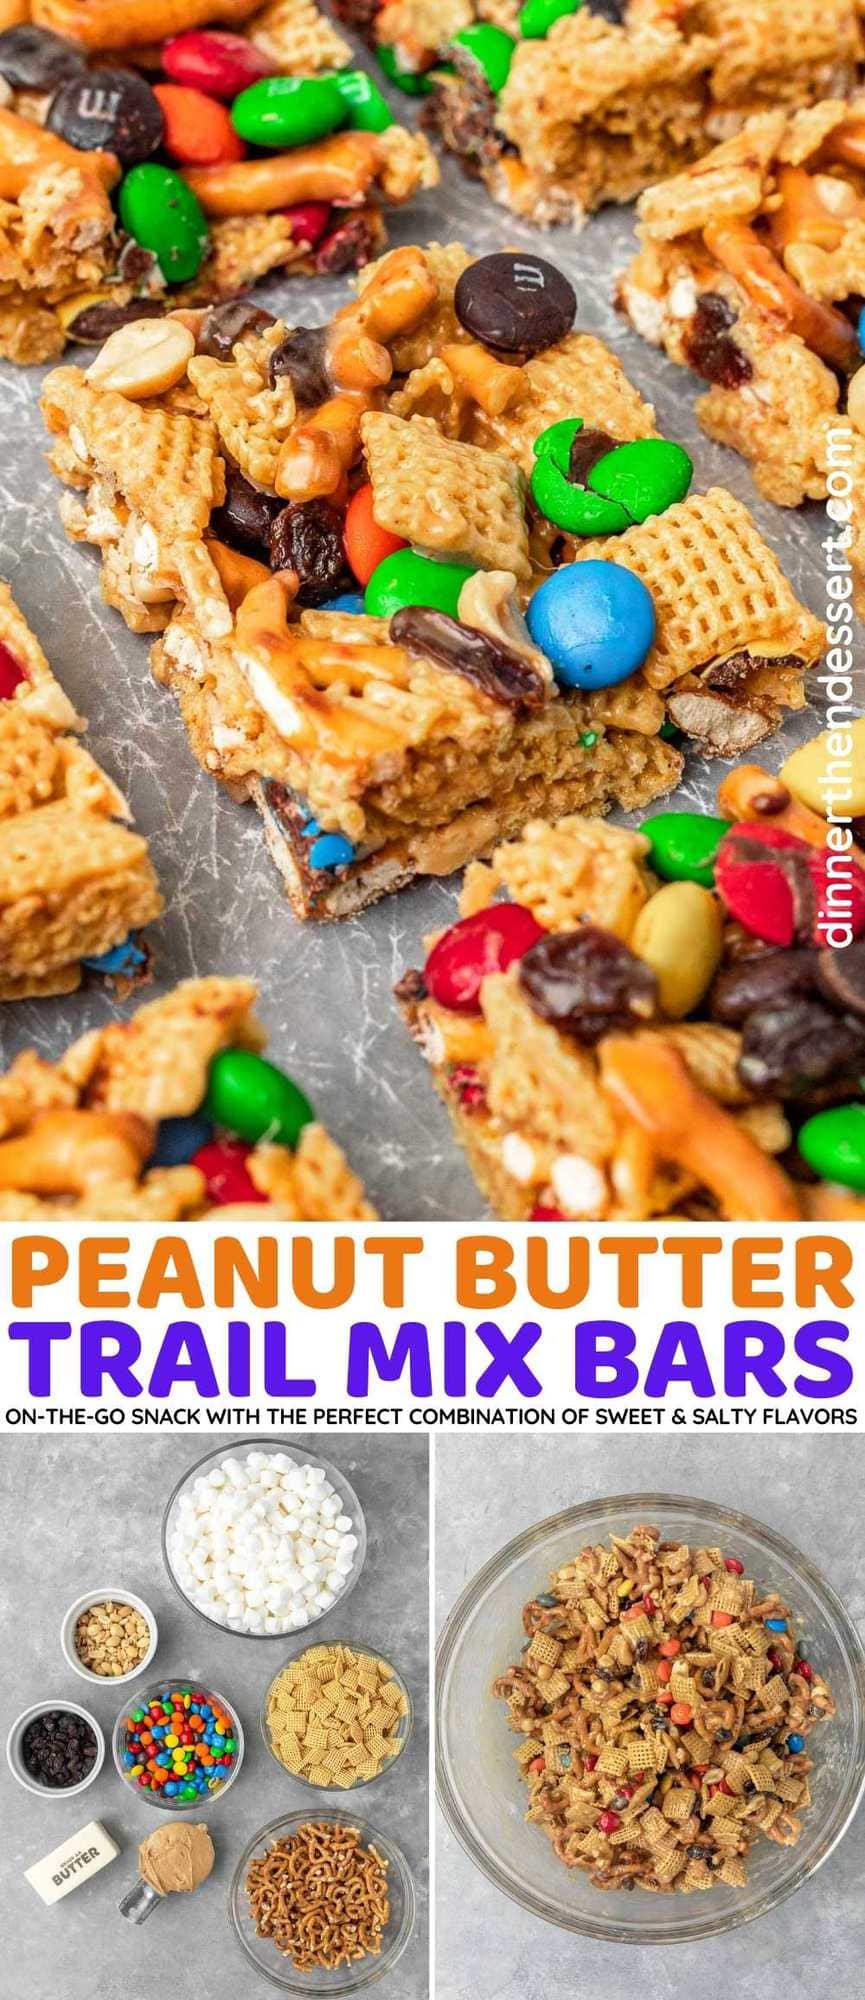 Peanut Butter Trail Mix Bars collage